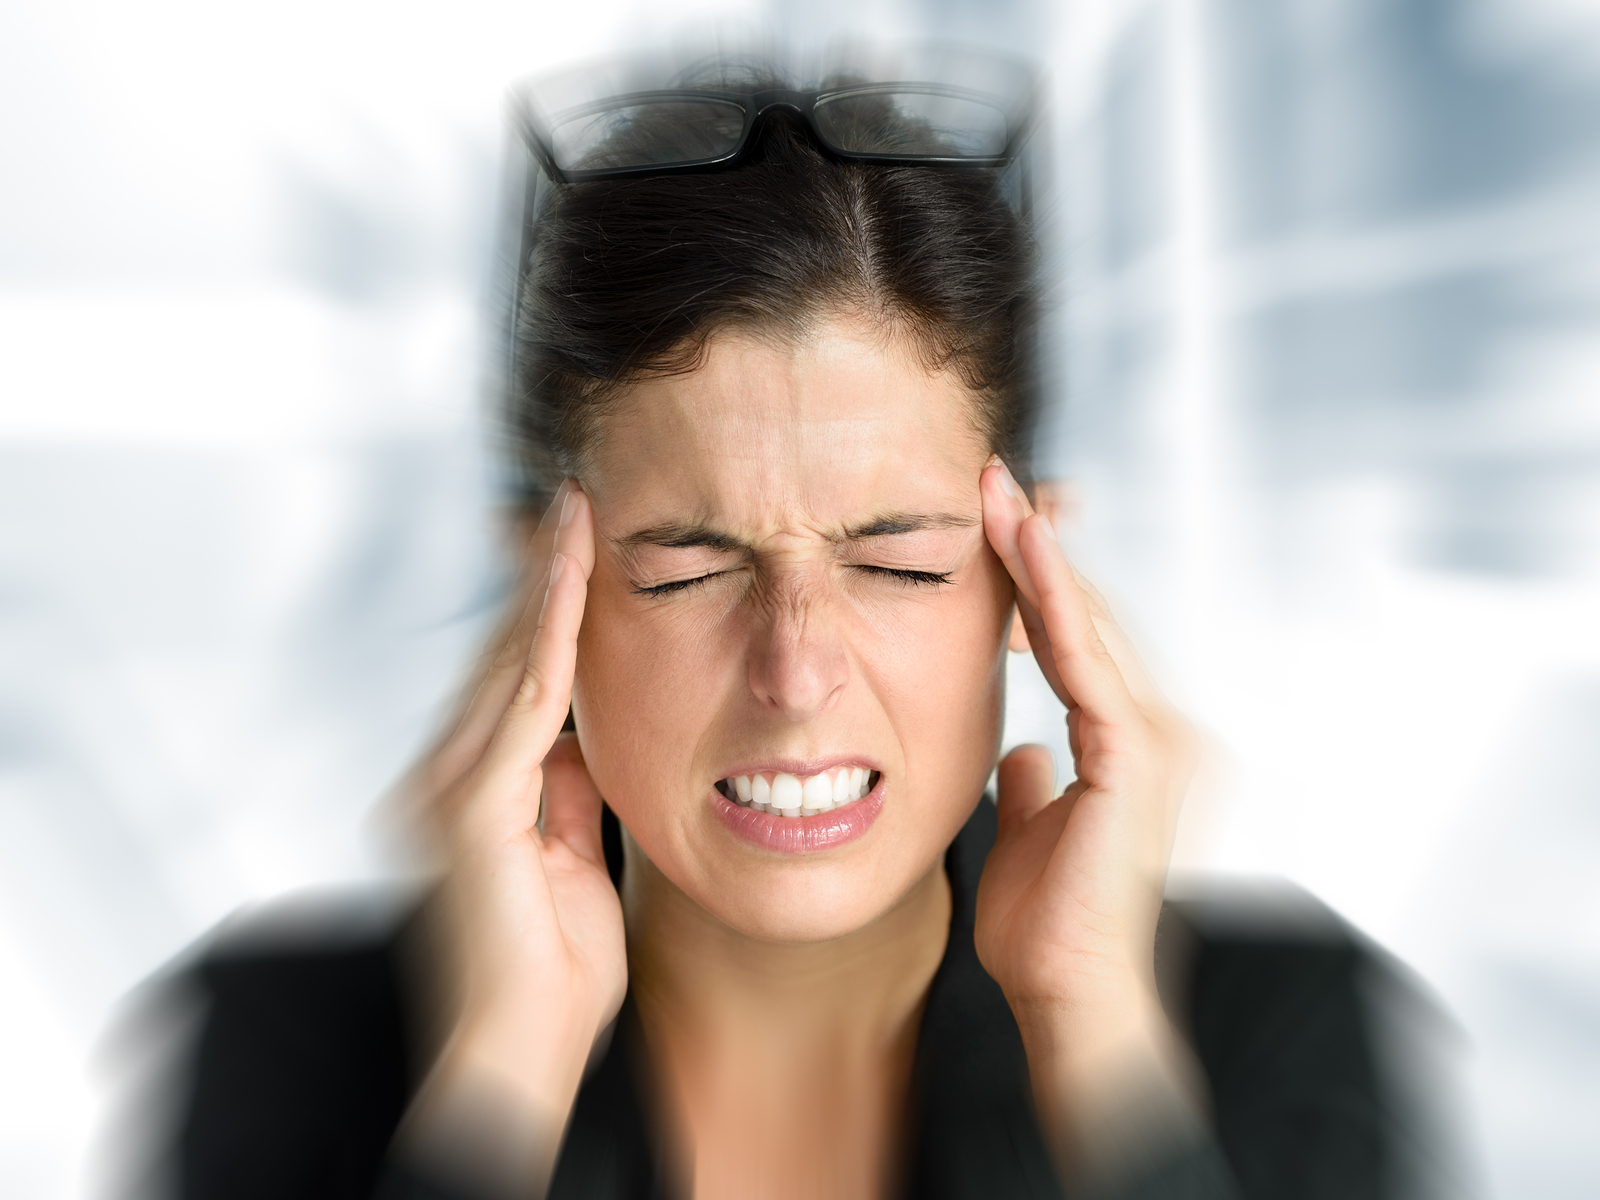 Upper Cervical Chiropractic Care/NUCCA and Migraines Headaches